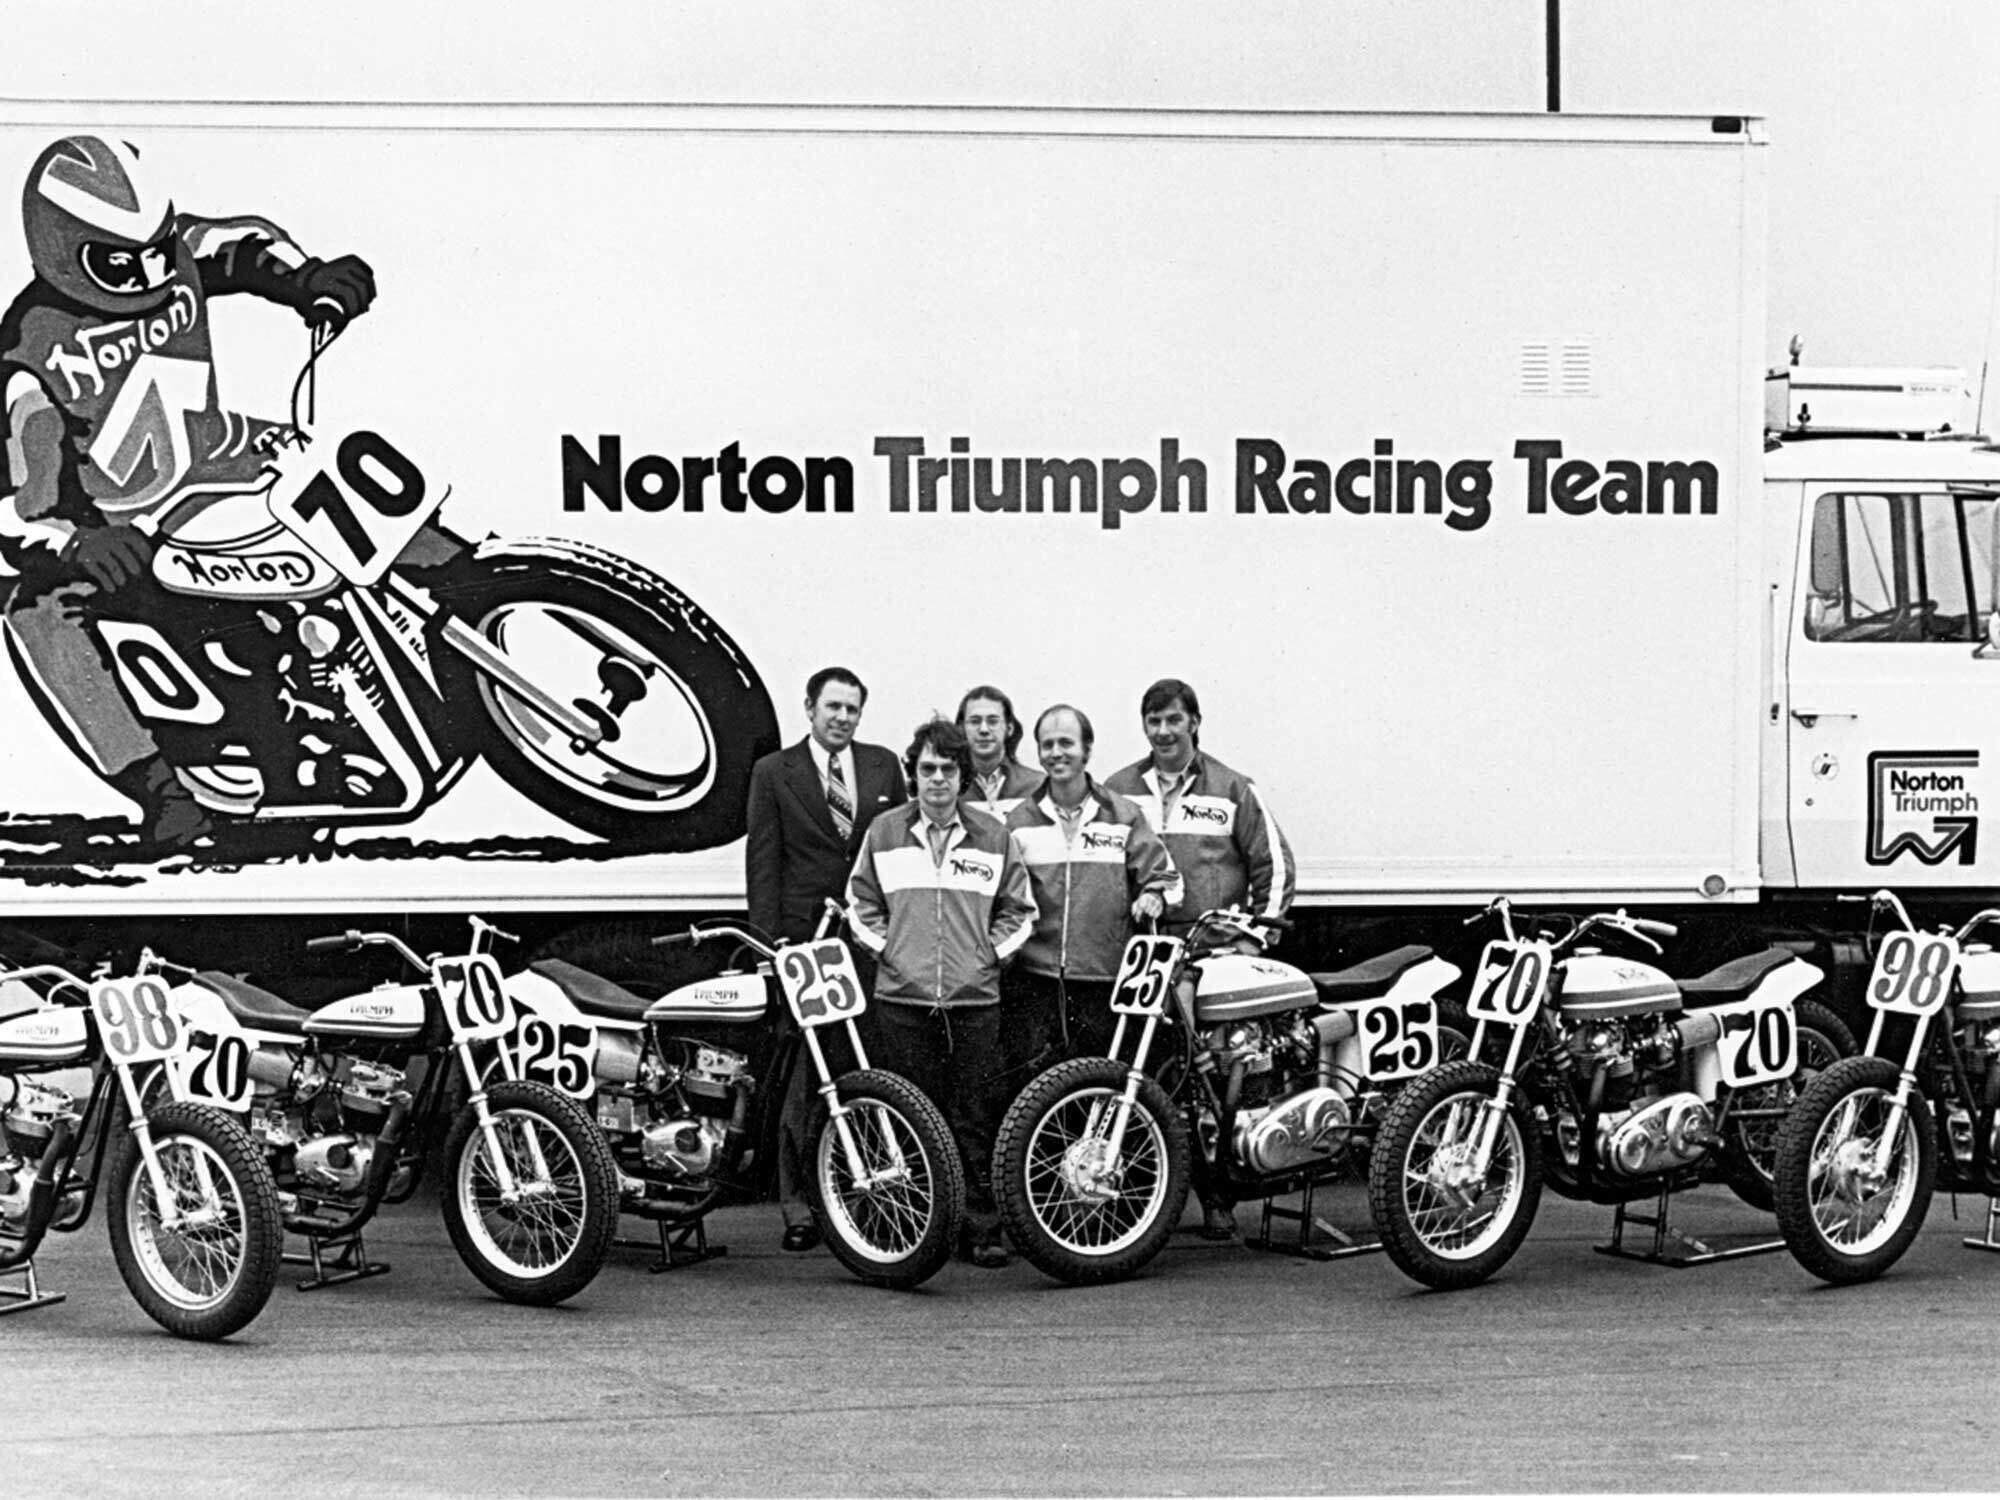 The 1975 Norton-Triumph Racing Team. From left to right: Bob Tryon, Brent Thompson, Steve Storz, Jim Messler, and Sterling Goin.